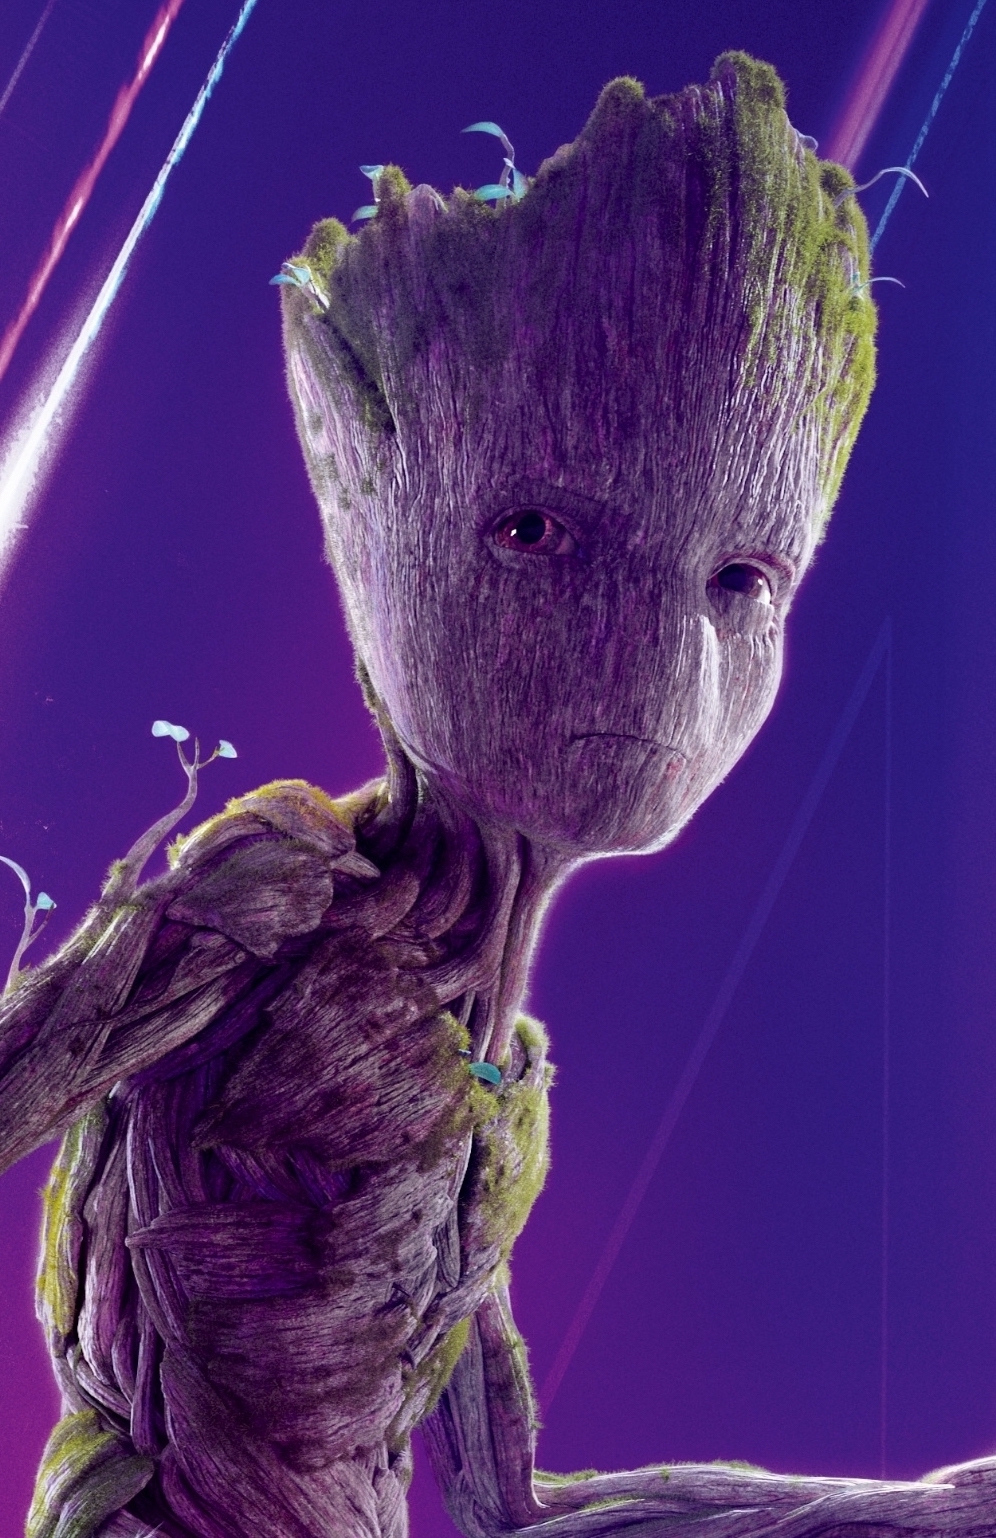 guardians of the galaxy movie groot